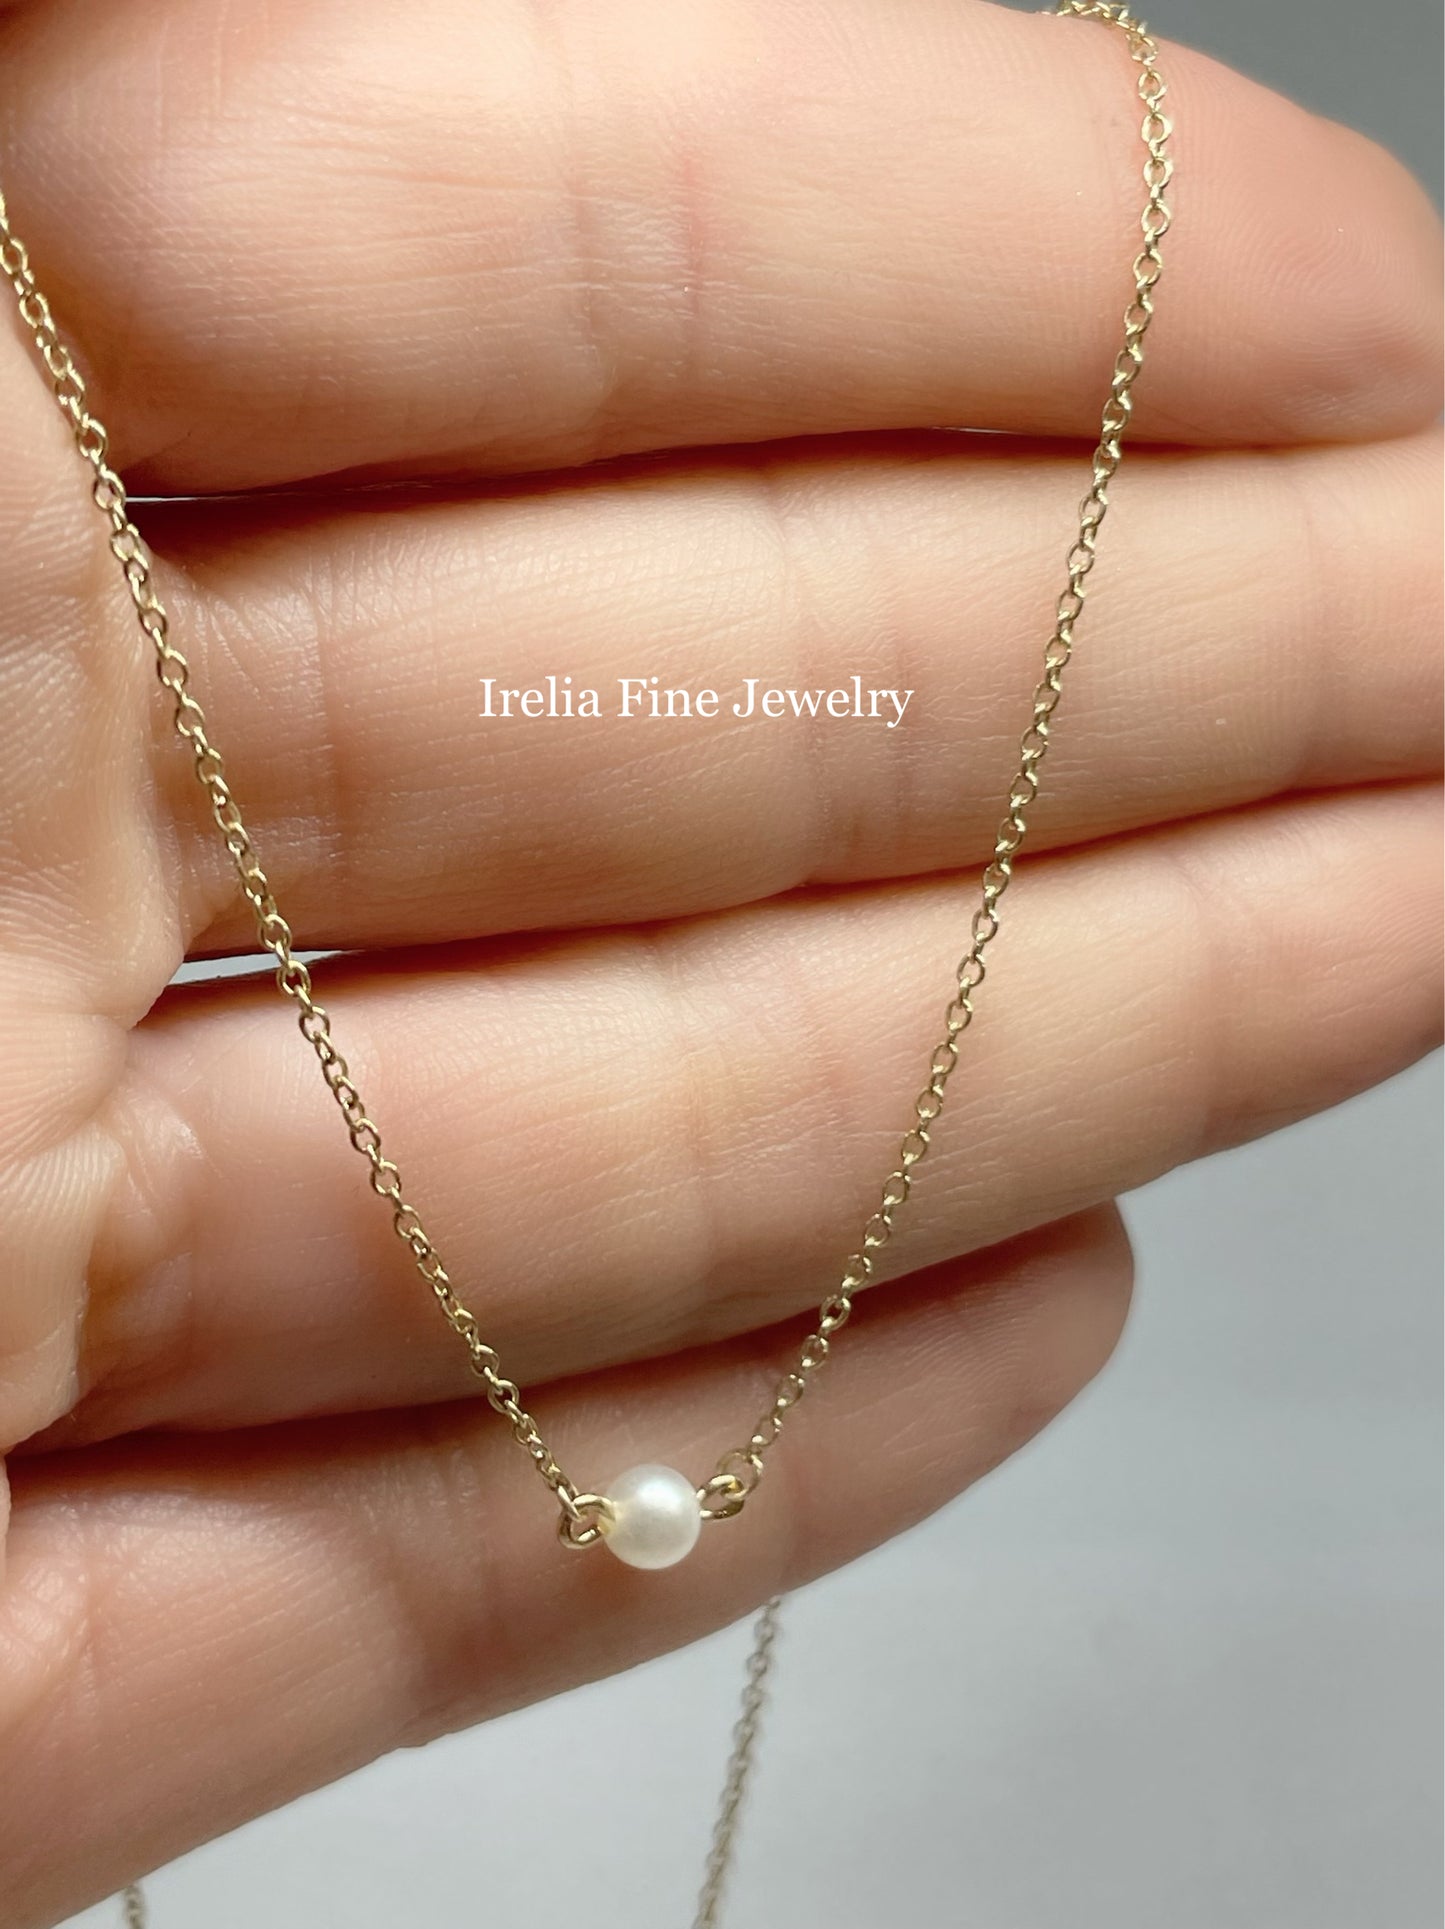 Tiny 14K Yellow Gold Freshwater Cultured Pearl, comes with adjustable 16-18" Necklace